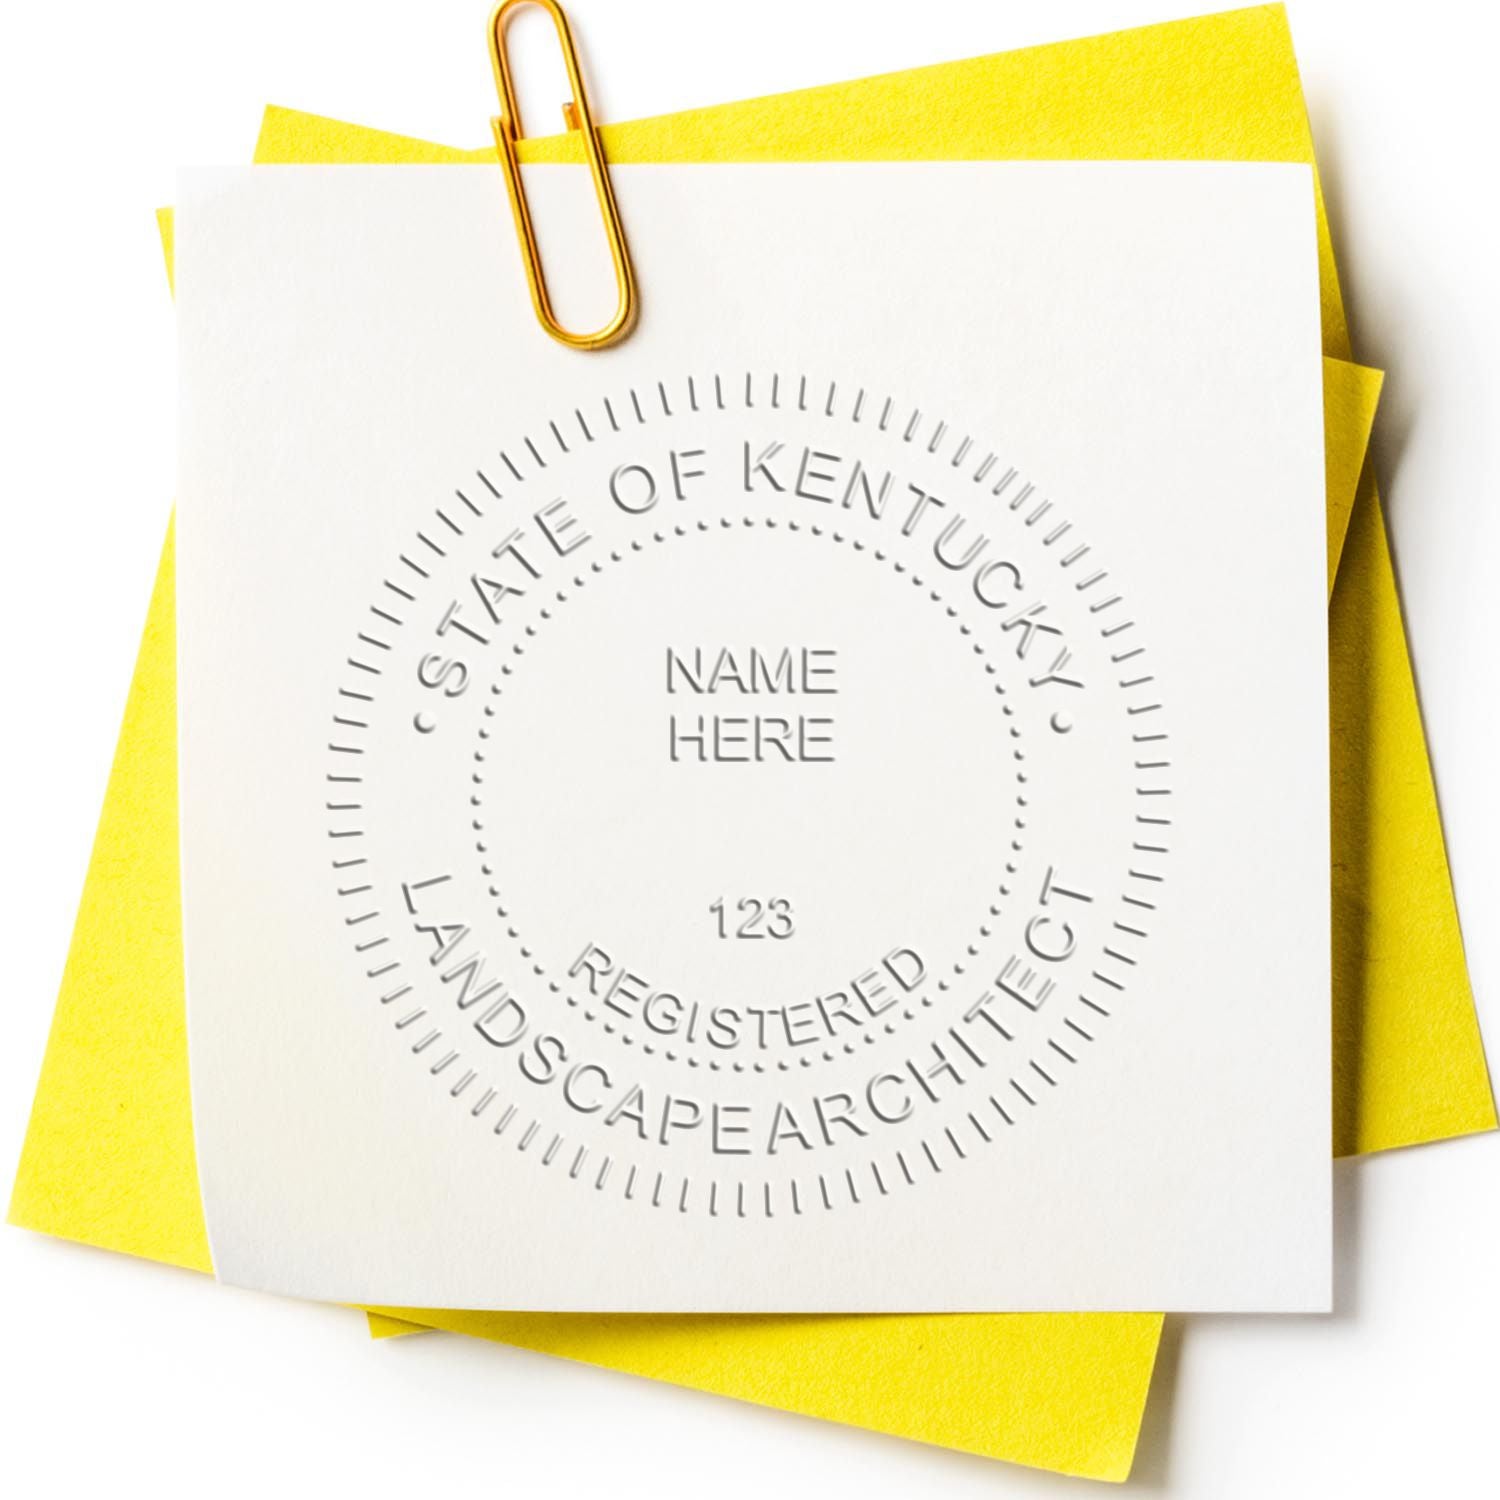 A stamped impression of the State of Kentucky Handheld Landscape Architect Seal in this stylish lifestyle photo, setting the tone for a unique and personalized product.